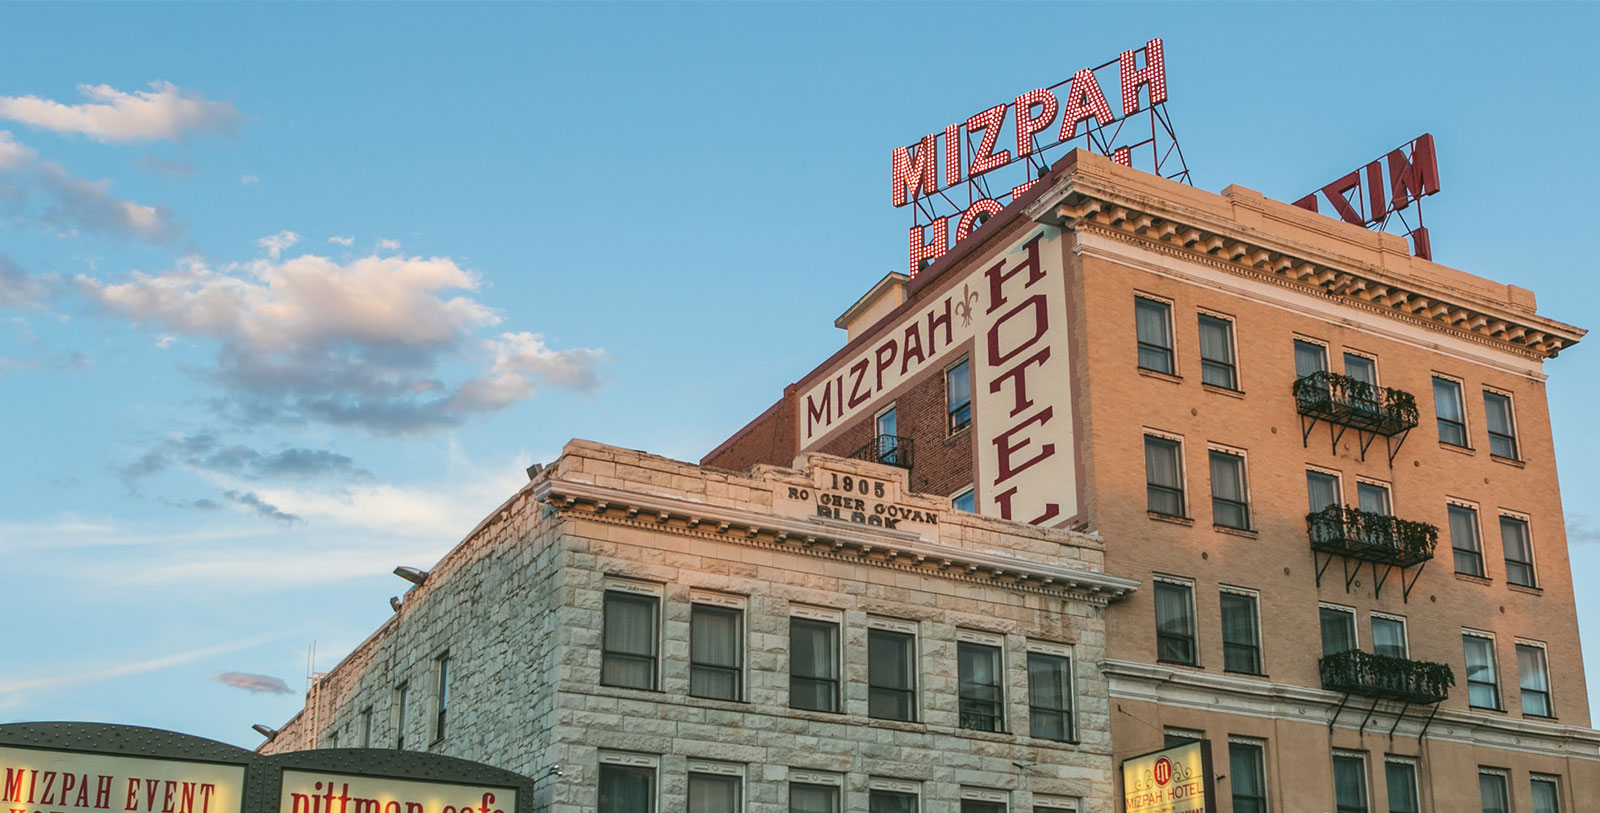 Discover the opulence of the Mizpah Hotel, which was the tallest building in Nevada through the 1920s.